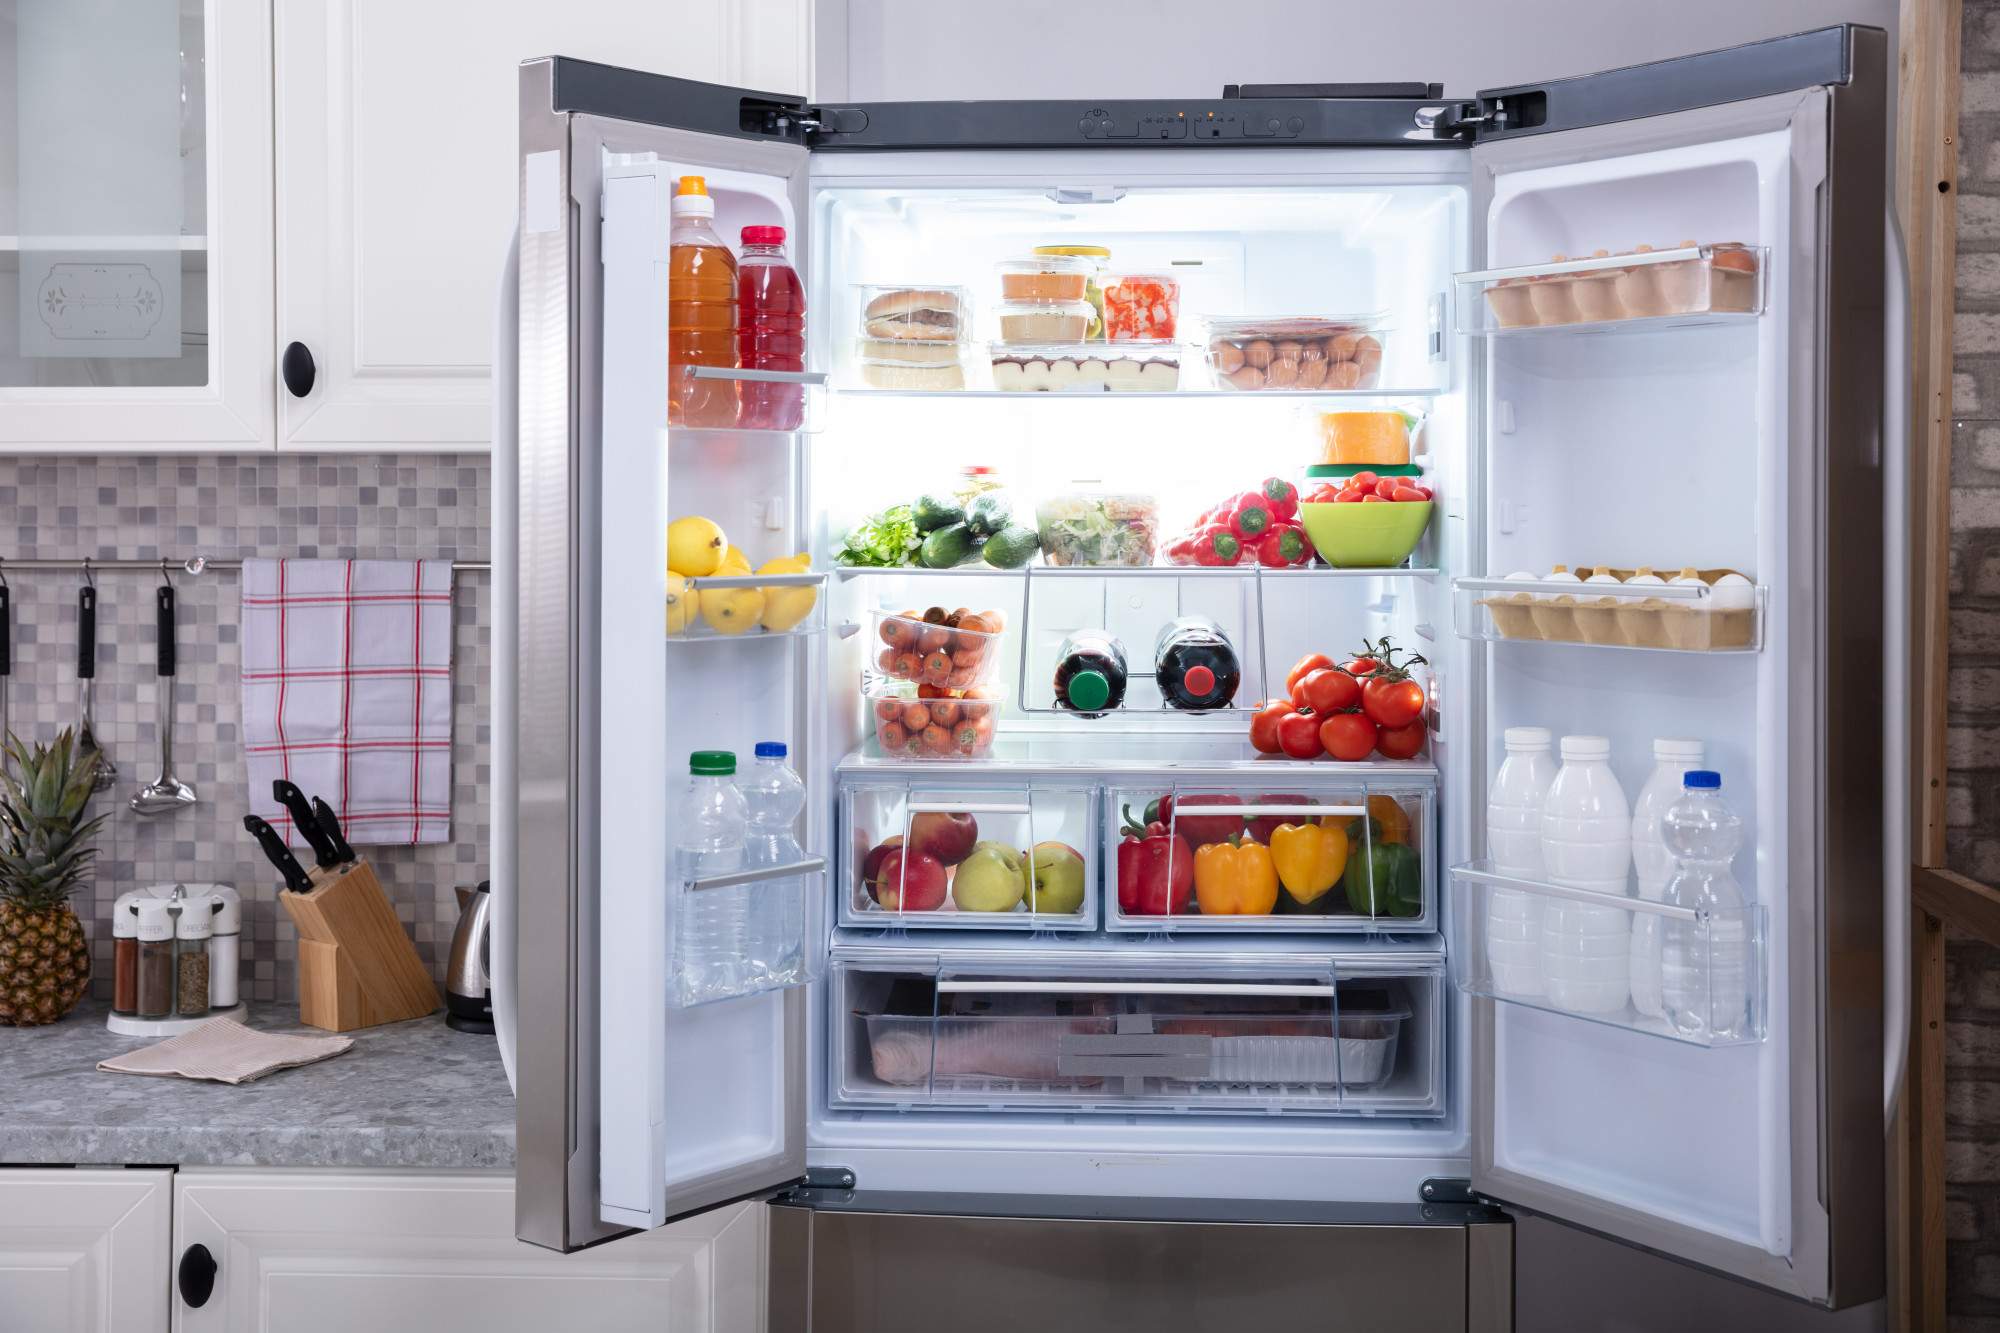 5 Refrigerator Problems Homeowners May Encounter